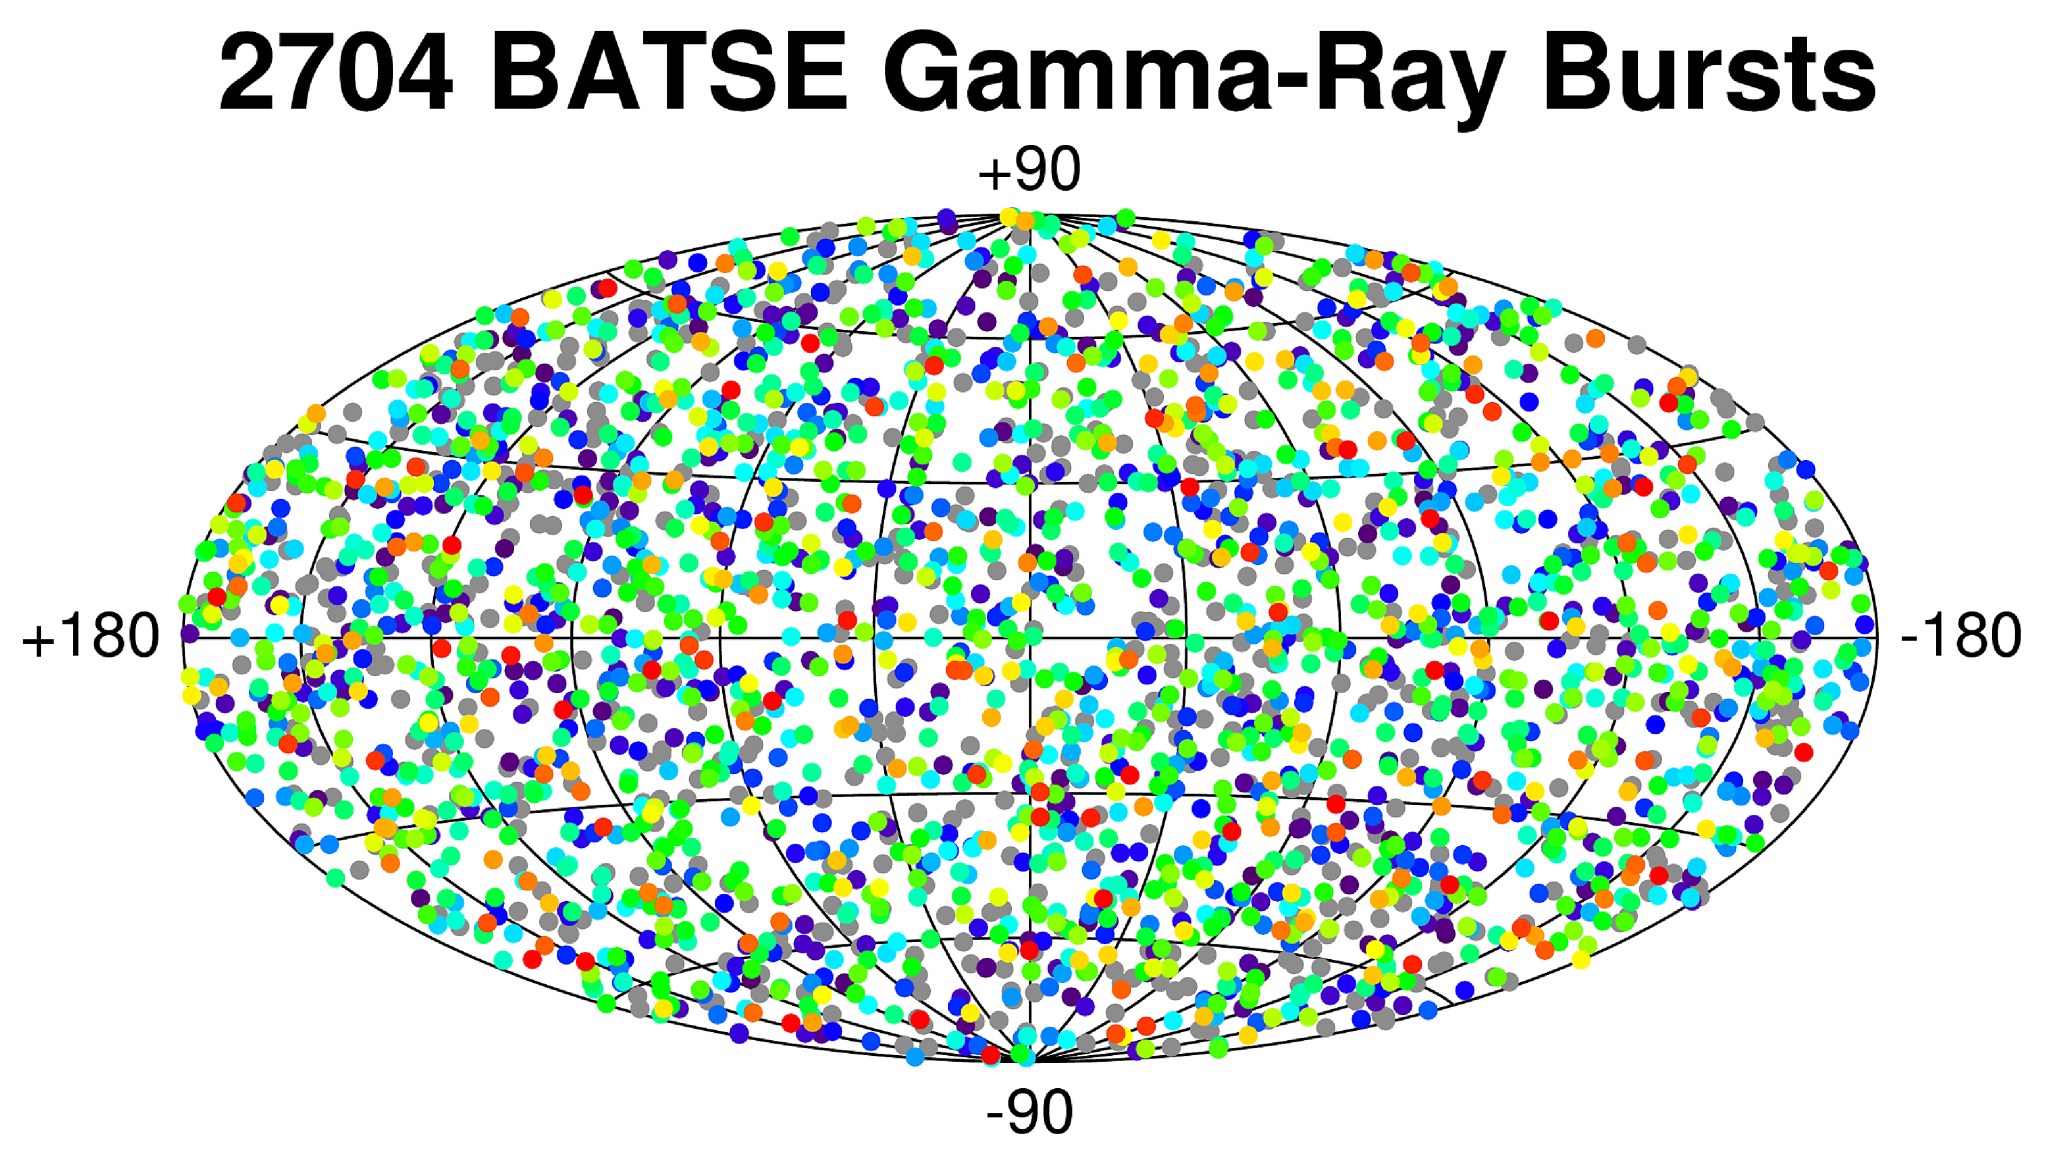 BATSE graphic showing gamma-ray bursts occur all over the sky